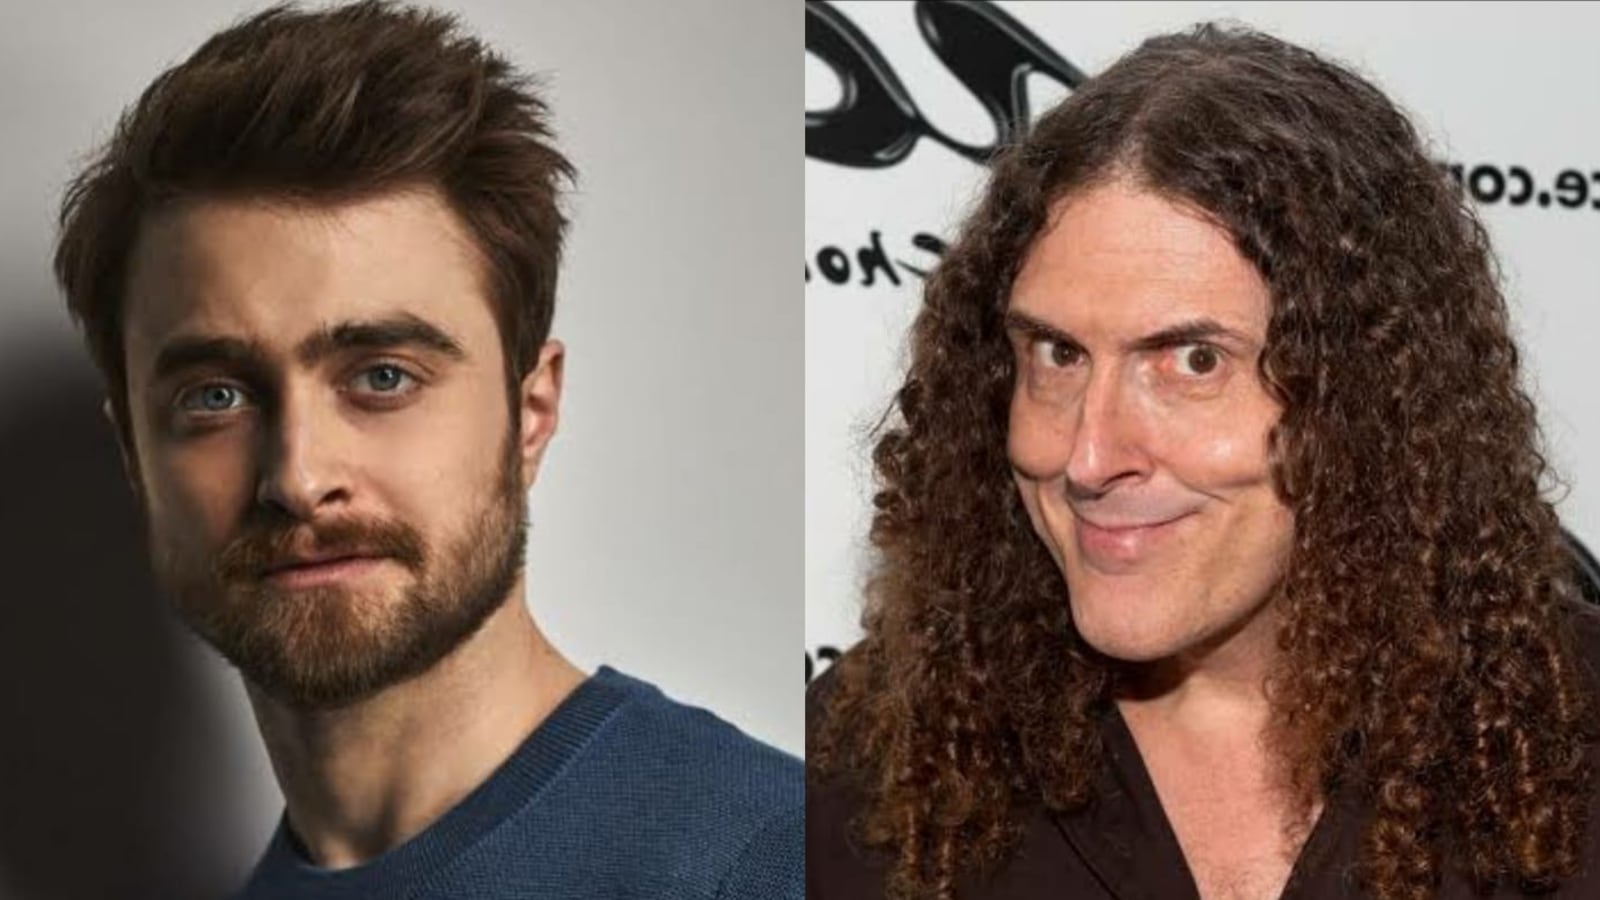 Daniel Radcliffe looks unrecognisable as Weird Al in first look from biopic, singer calls him ‘cosplayer’